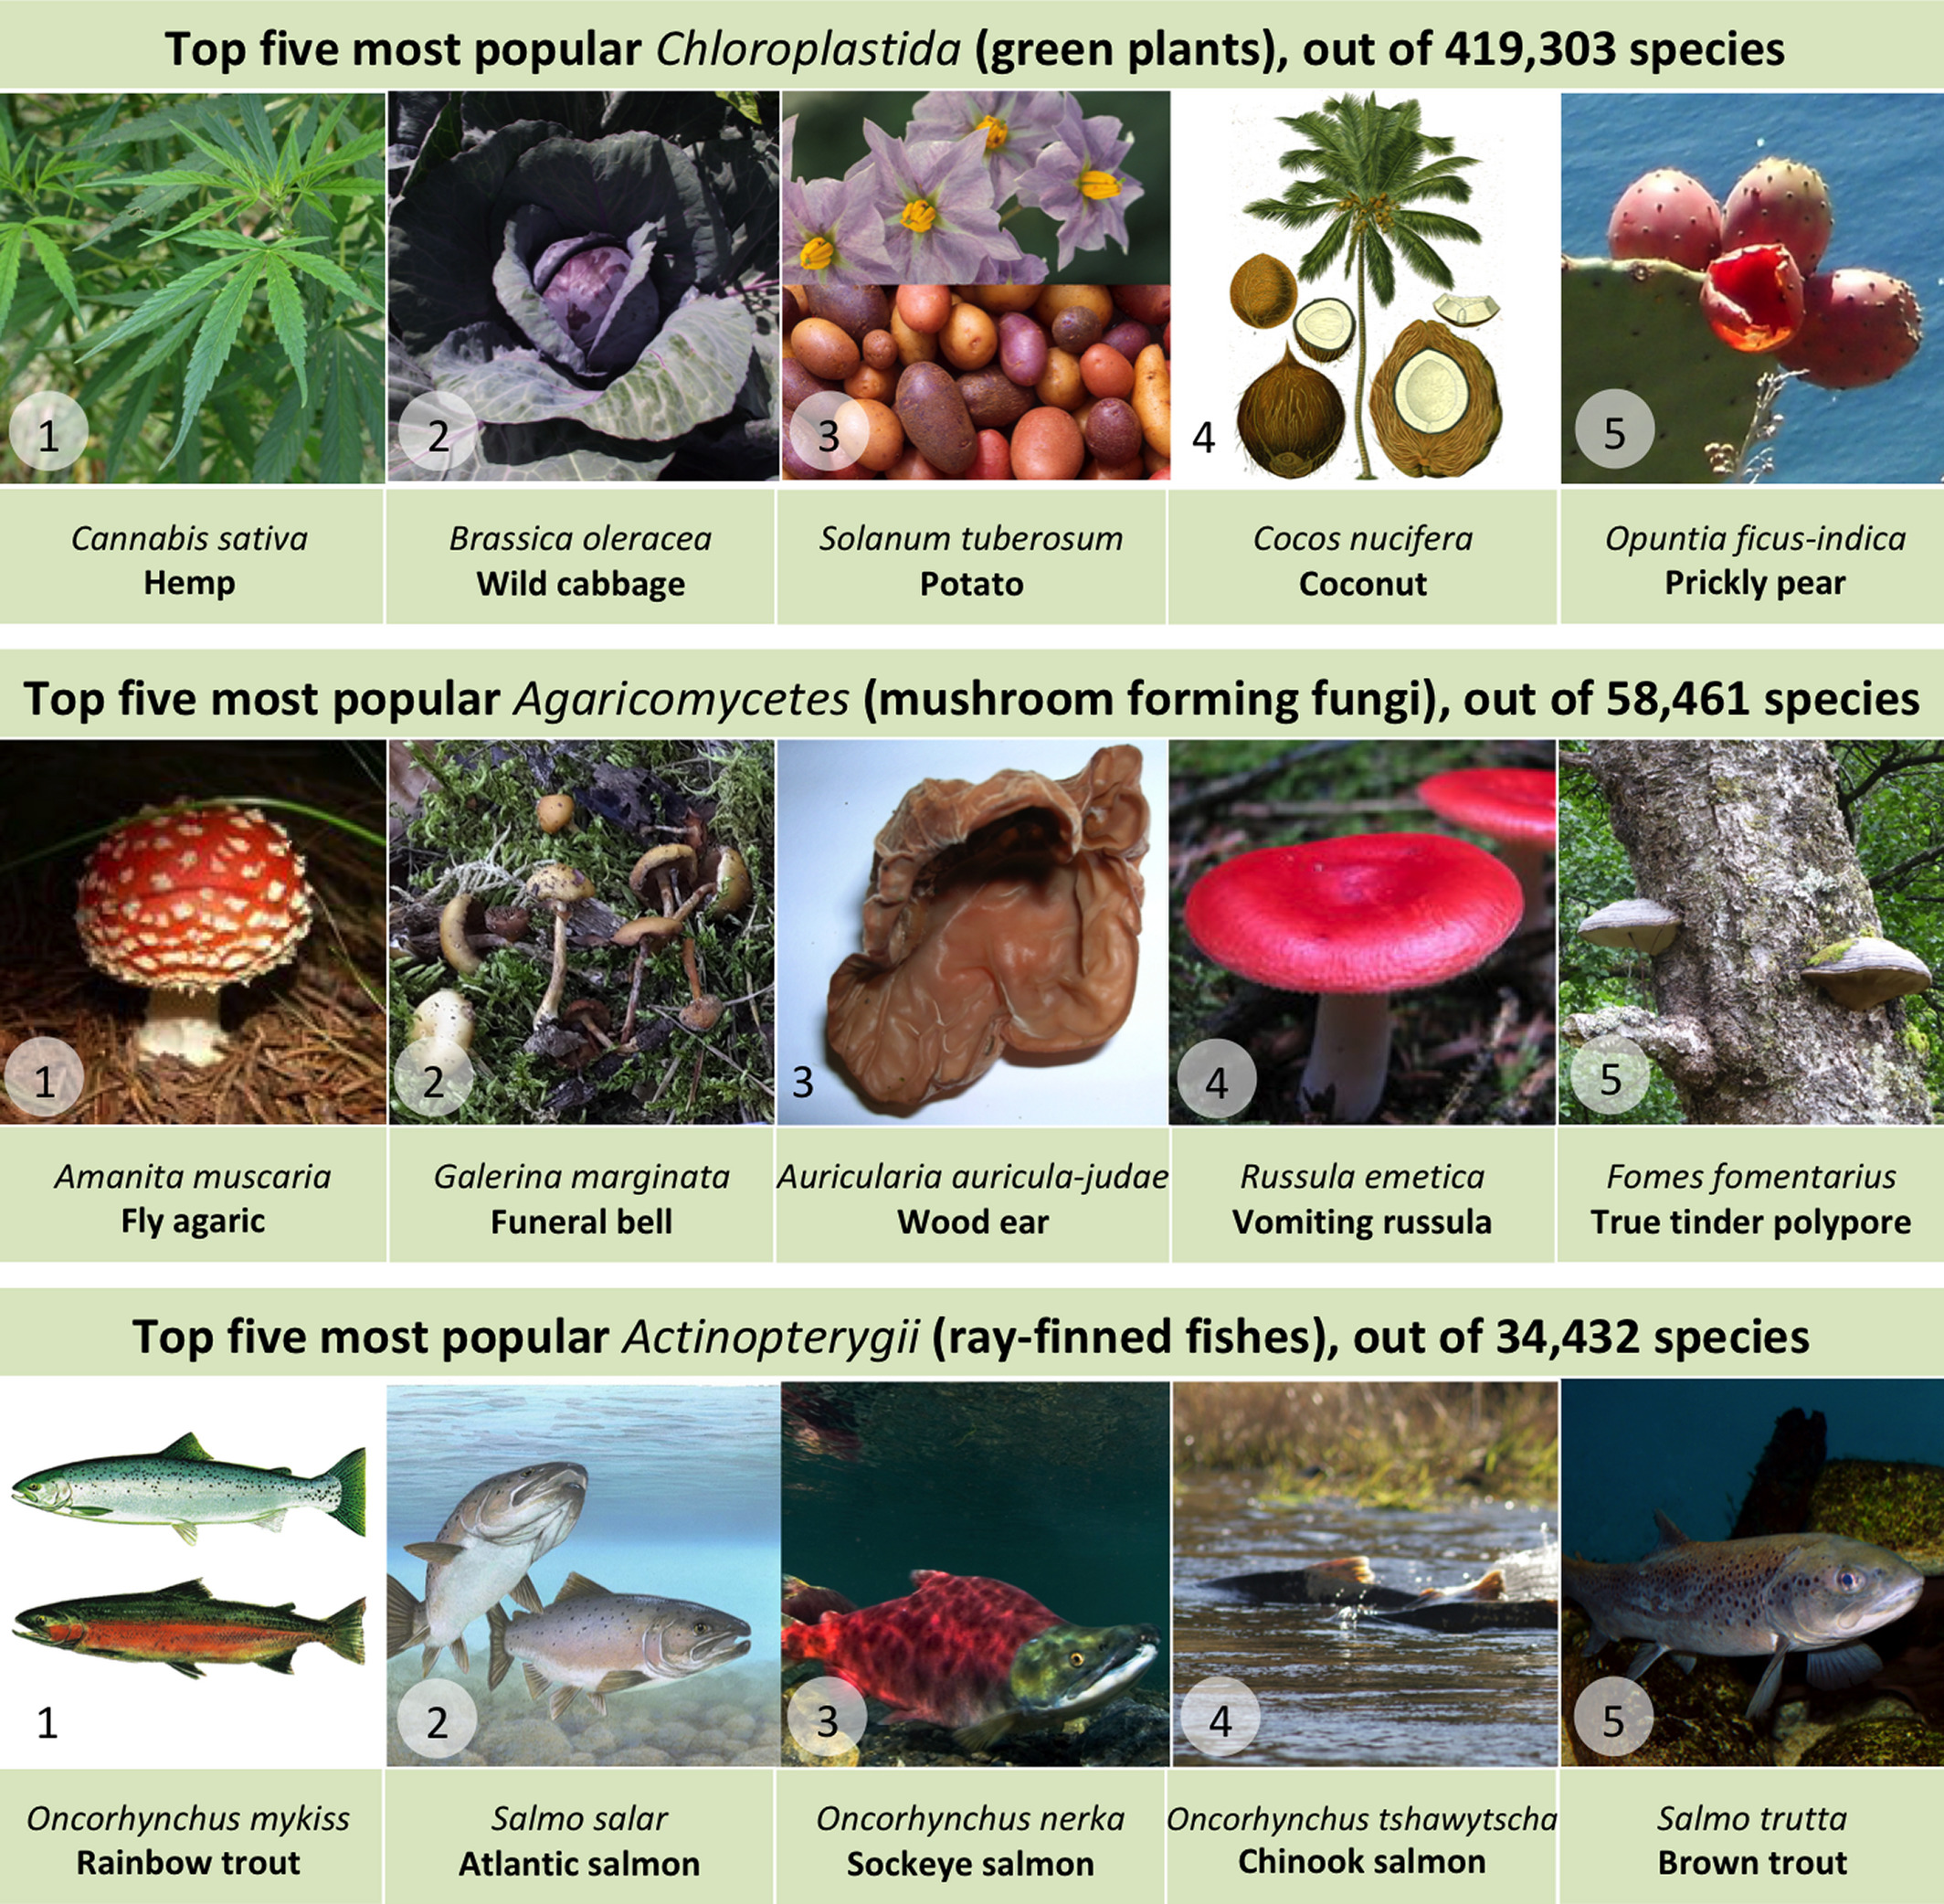 The most popular organisms are cannabis, fly agaric, and rainbow trout.